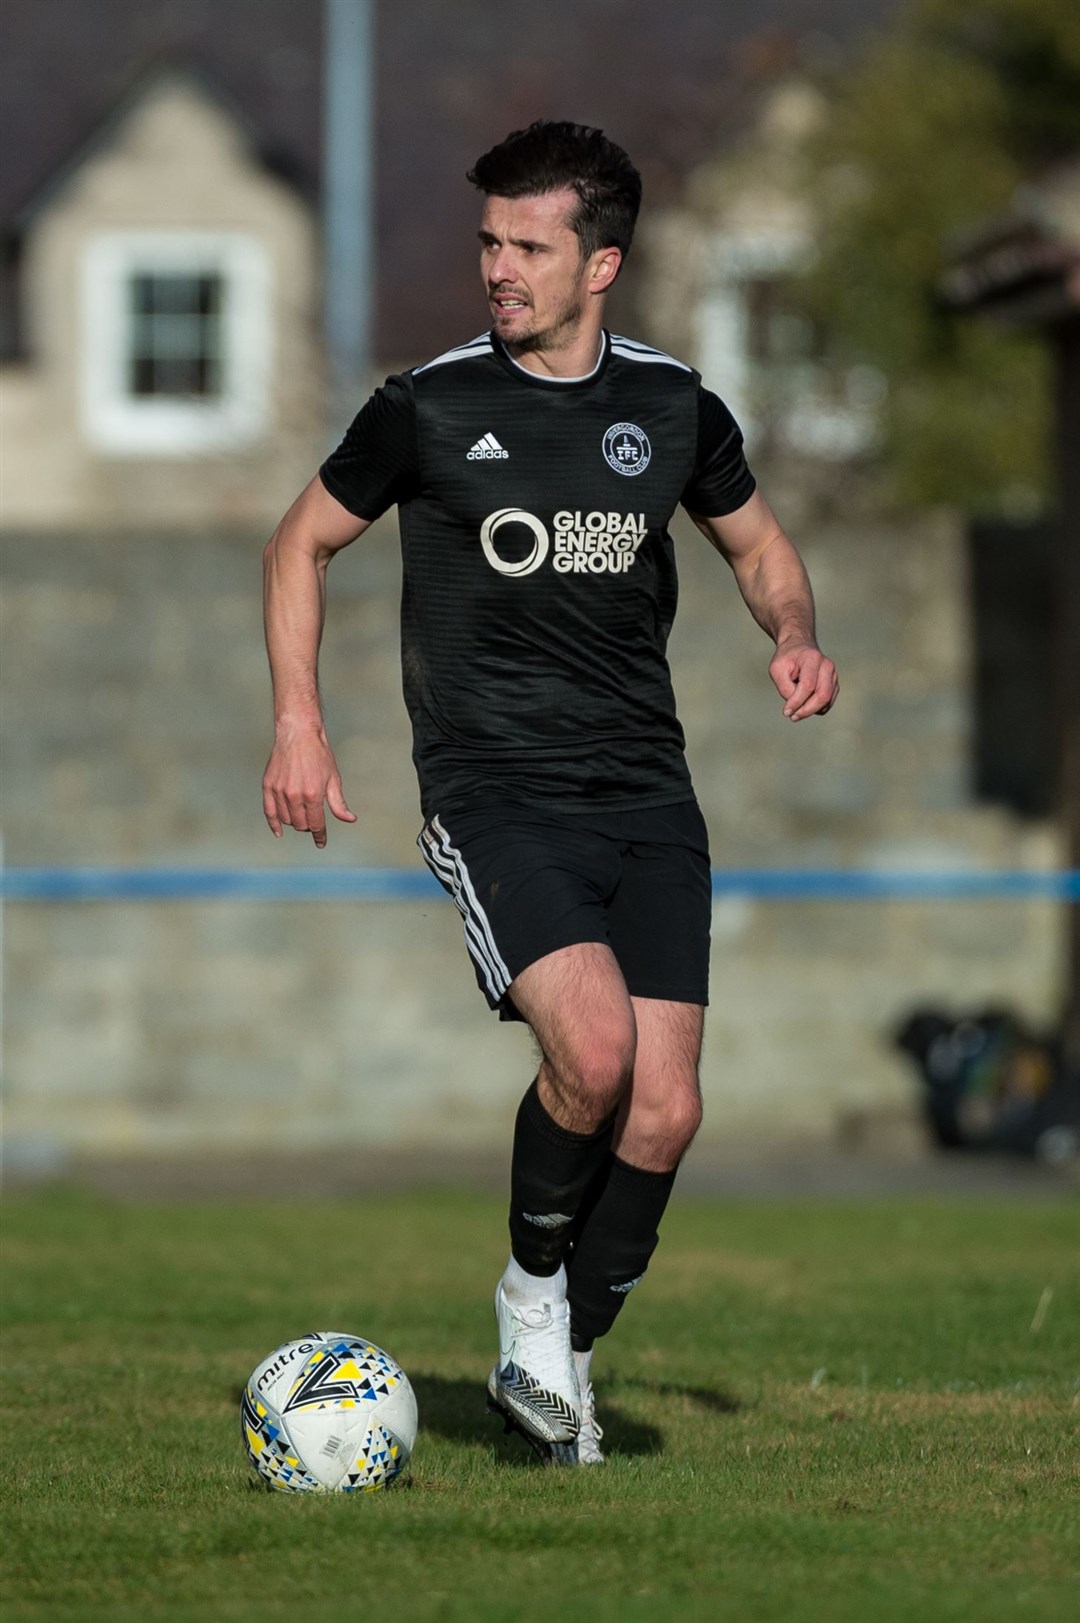 North Caledonian League 1..Golspie Sutherland 0 v Invergordon 4, King George V Park, Golspie...Invergordon lad and Brora Rangers manager Steven Mackay comes full circle. He started his football career playing for Invergordon at School...Picture: Callum Mackay..